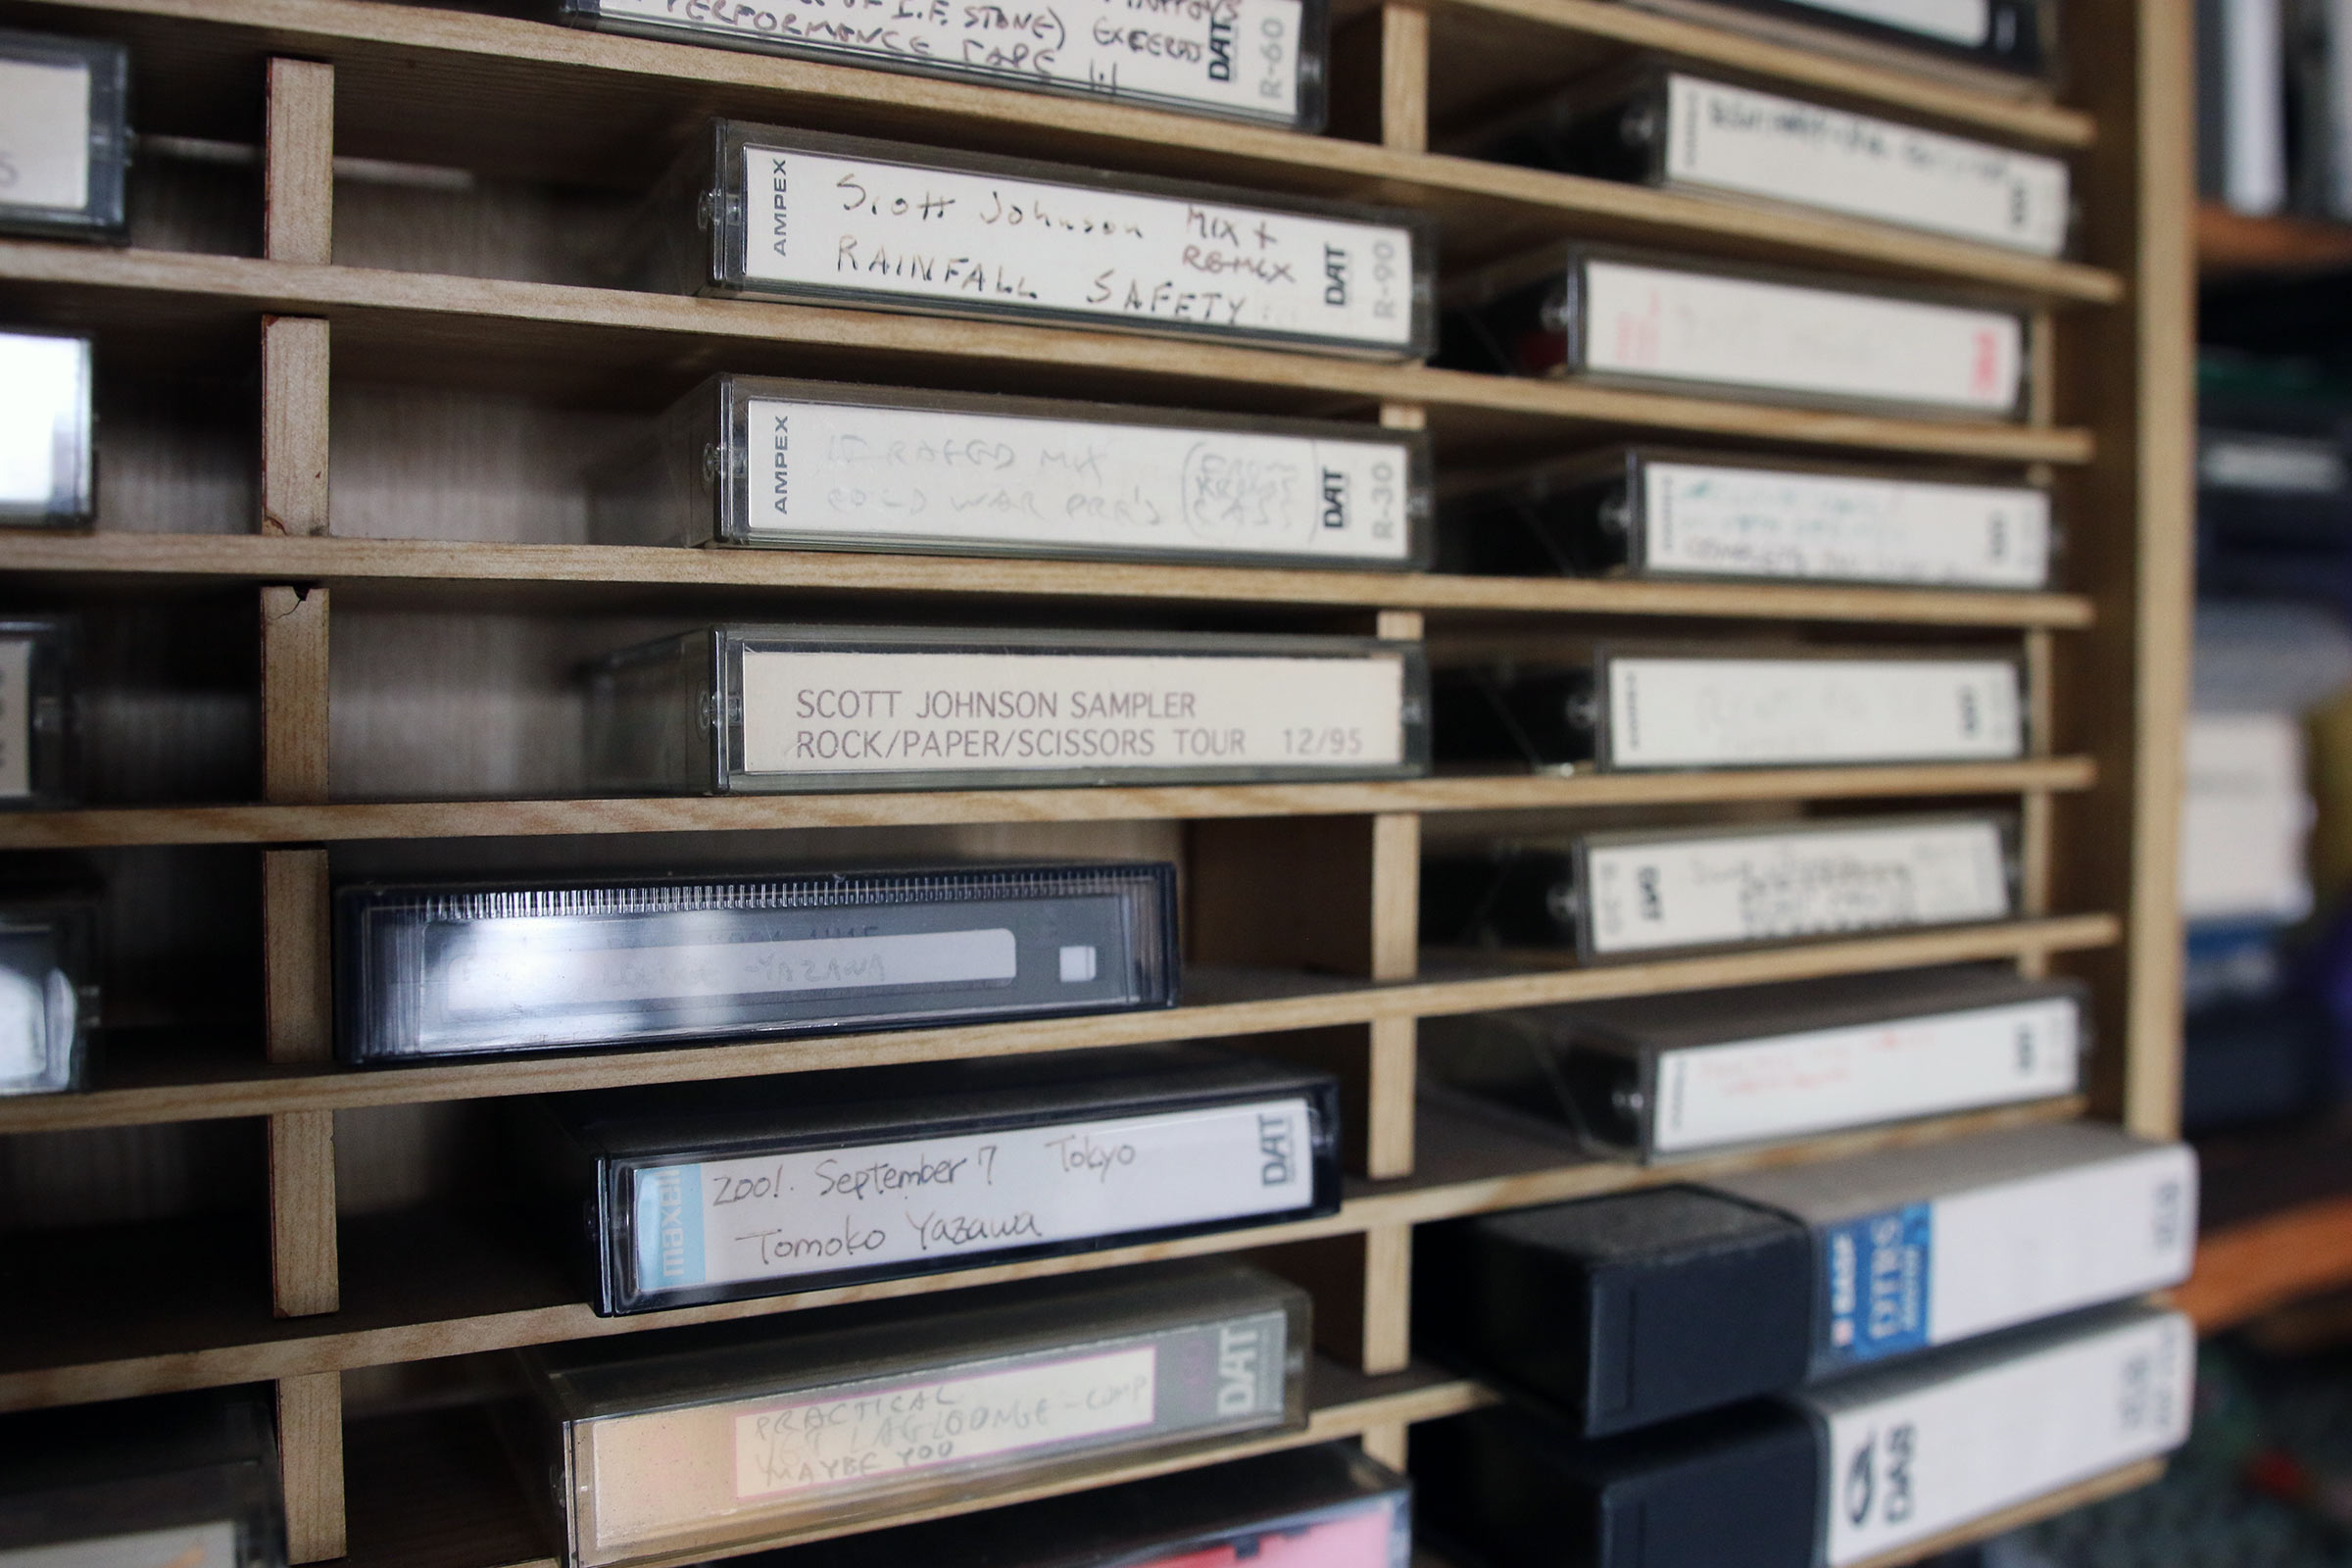 Some of the Scott Johnson's archival tapes of his compositions.